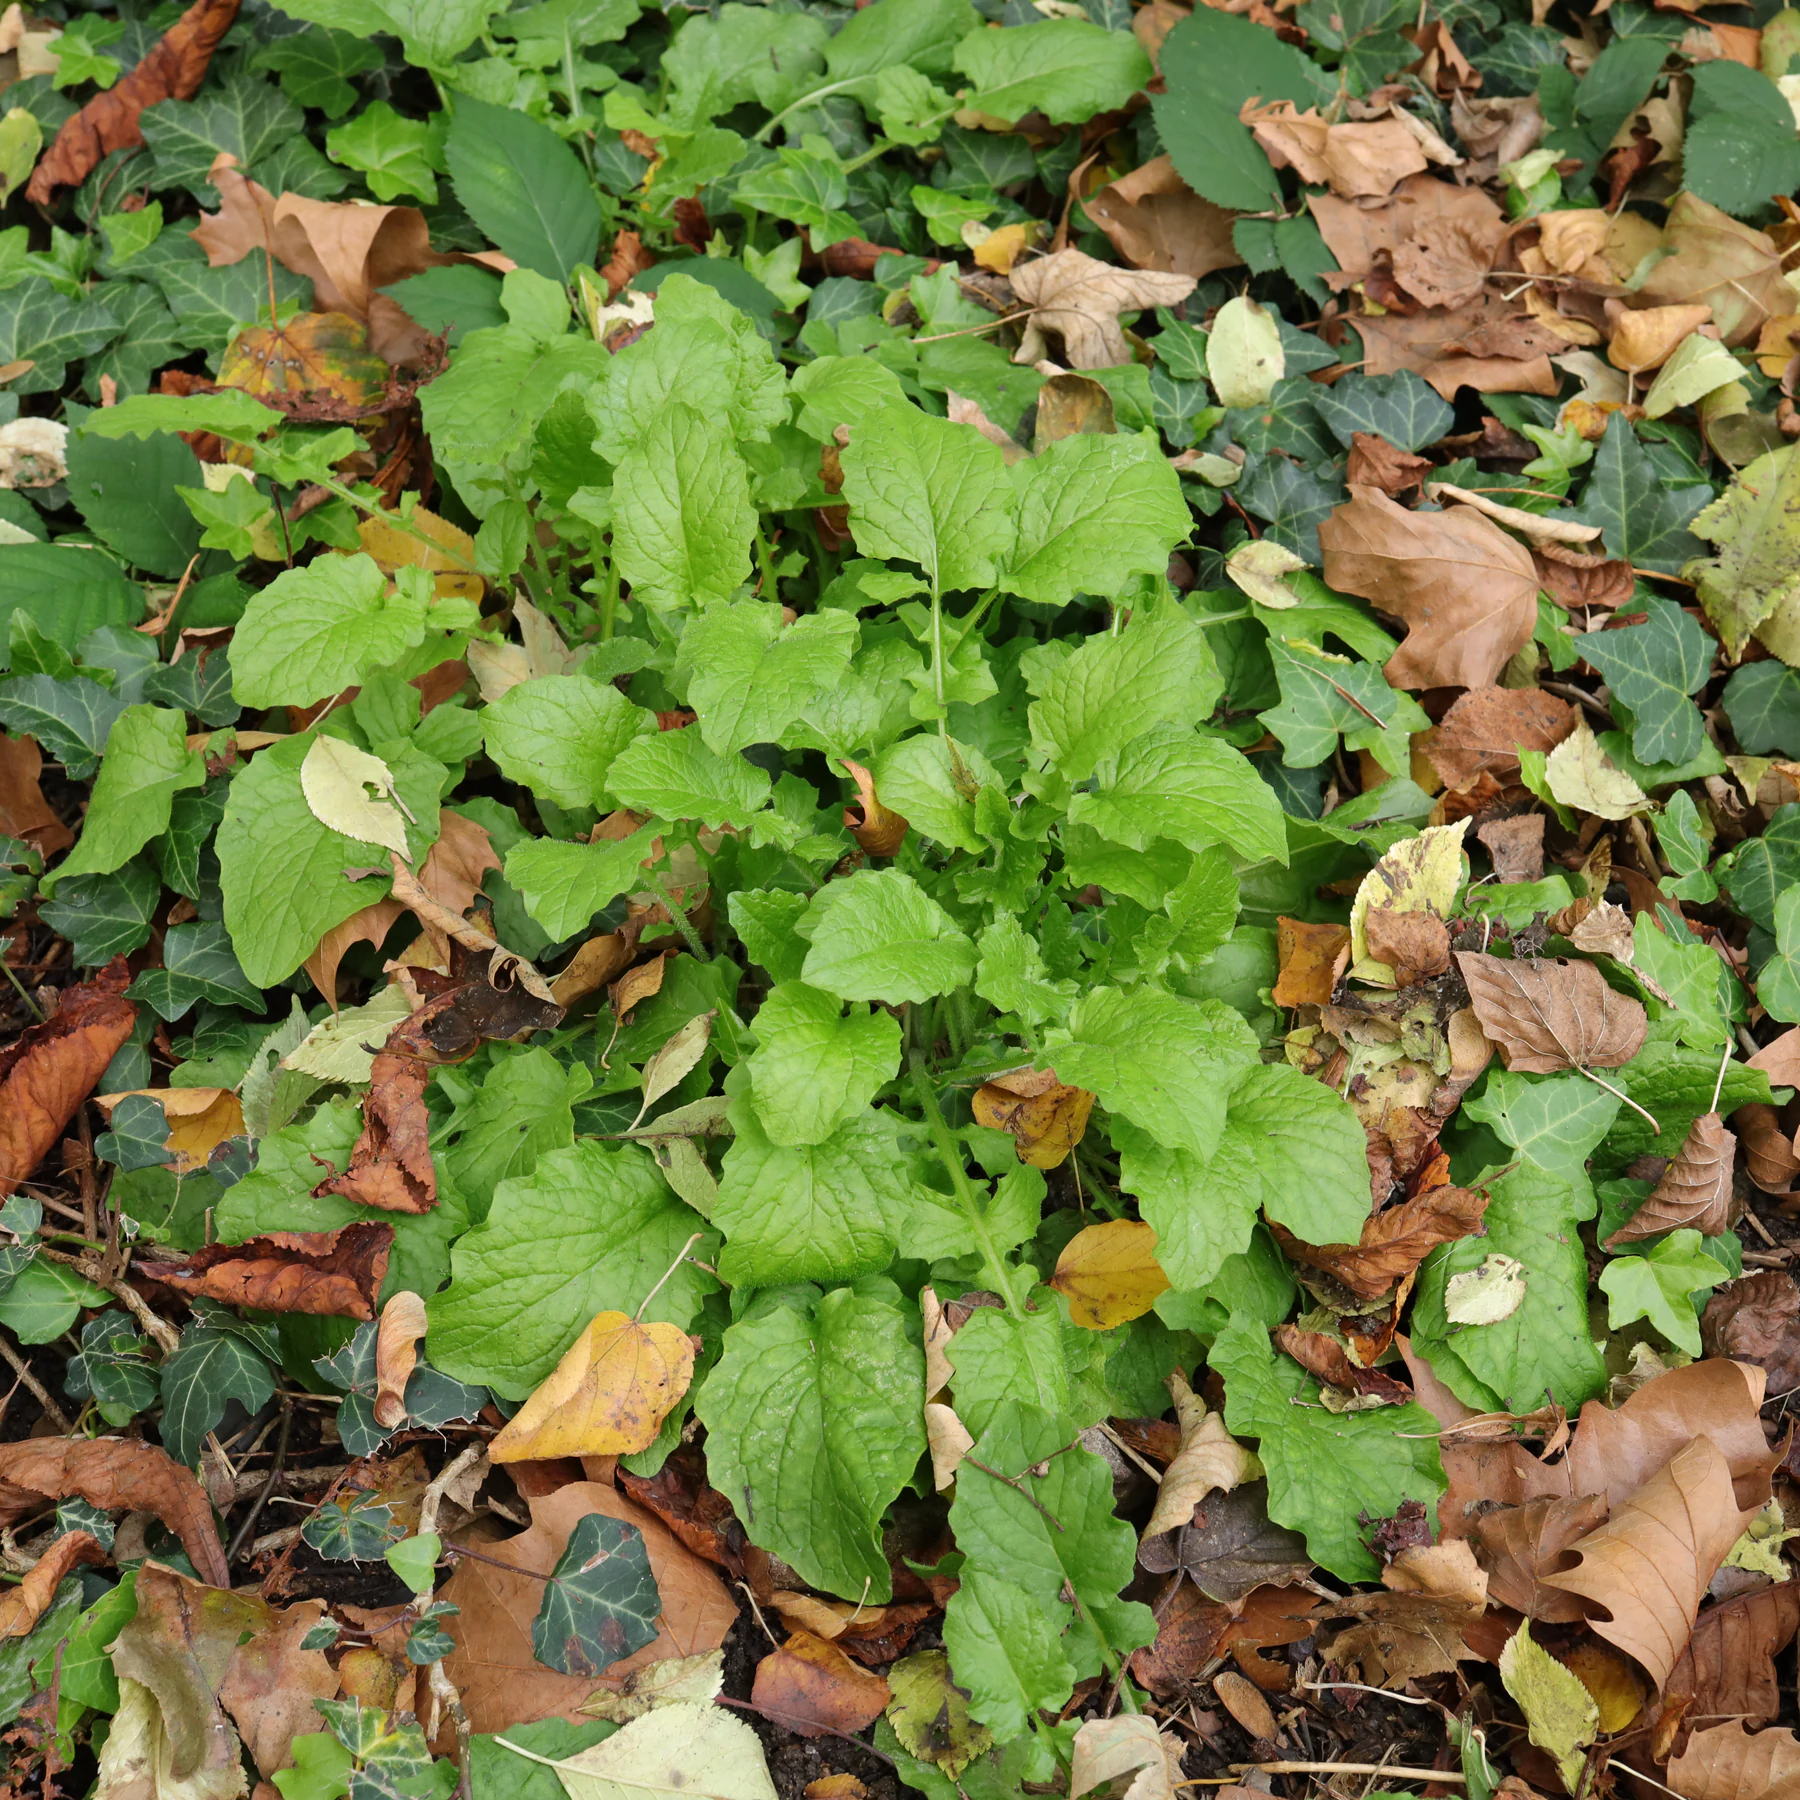 Young nipplewort plants in October